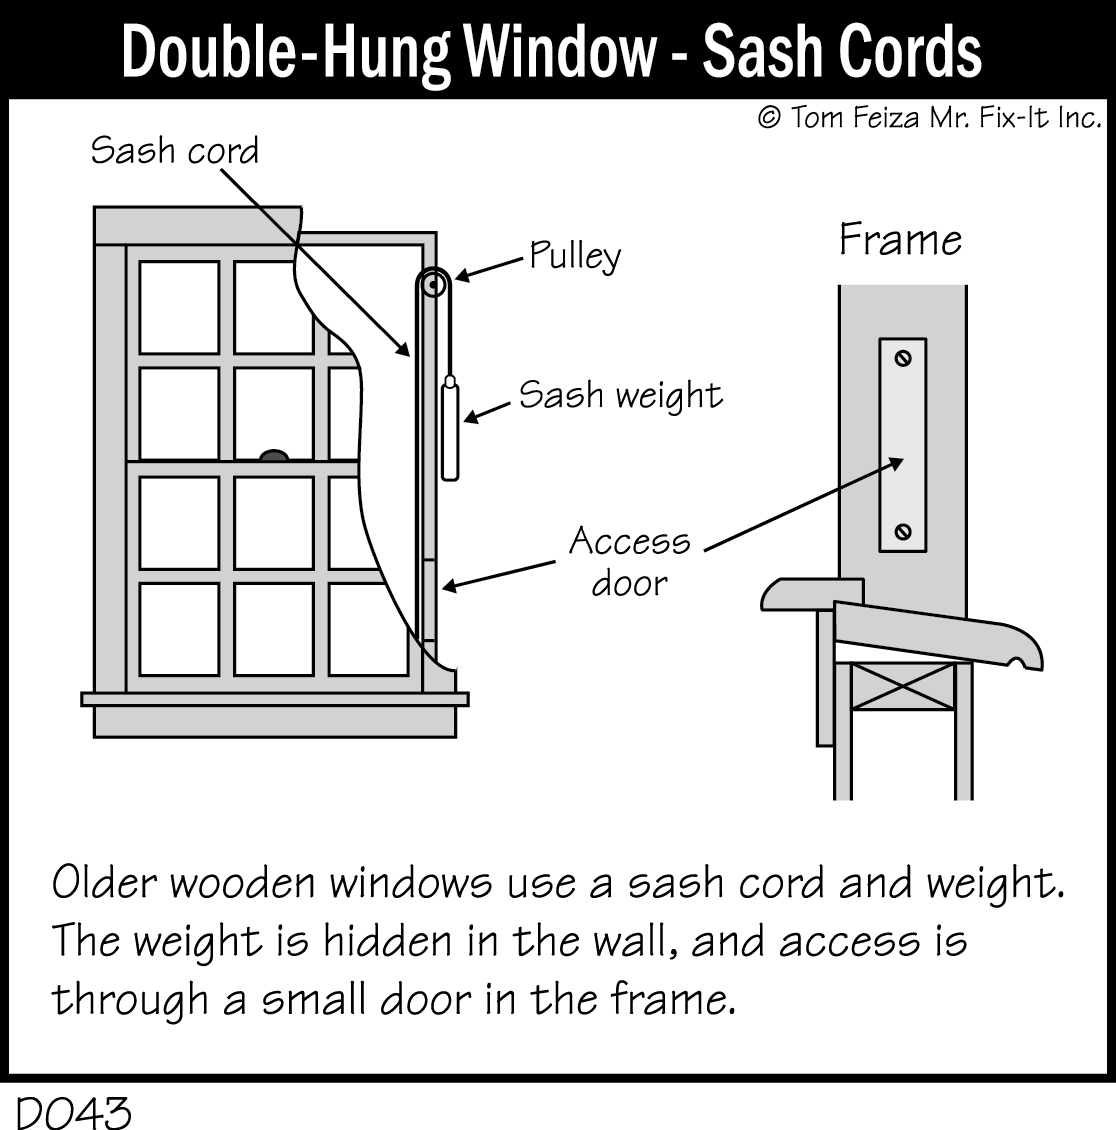 D043 - Double-Hung Window - Sash Cords - Covered Bridge Professional Home  Inspections